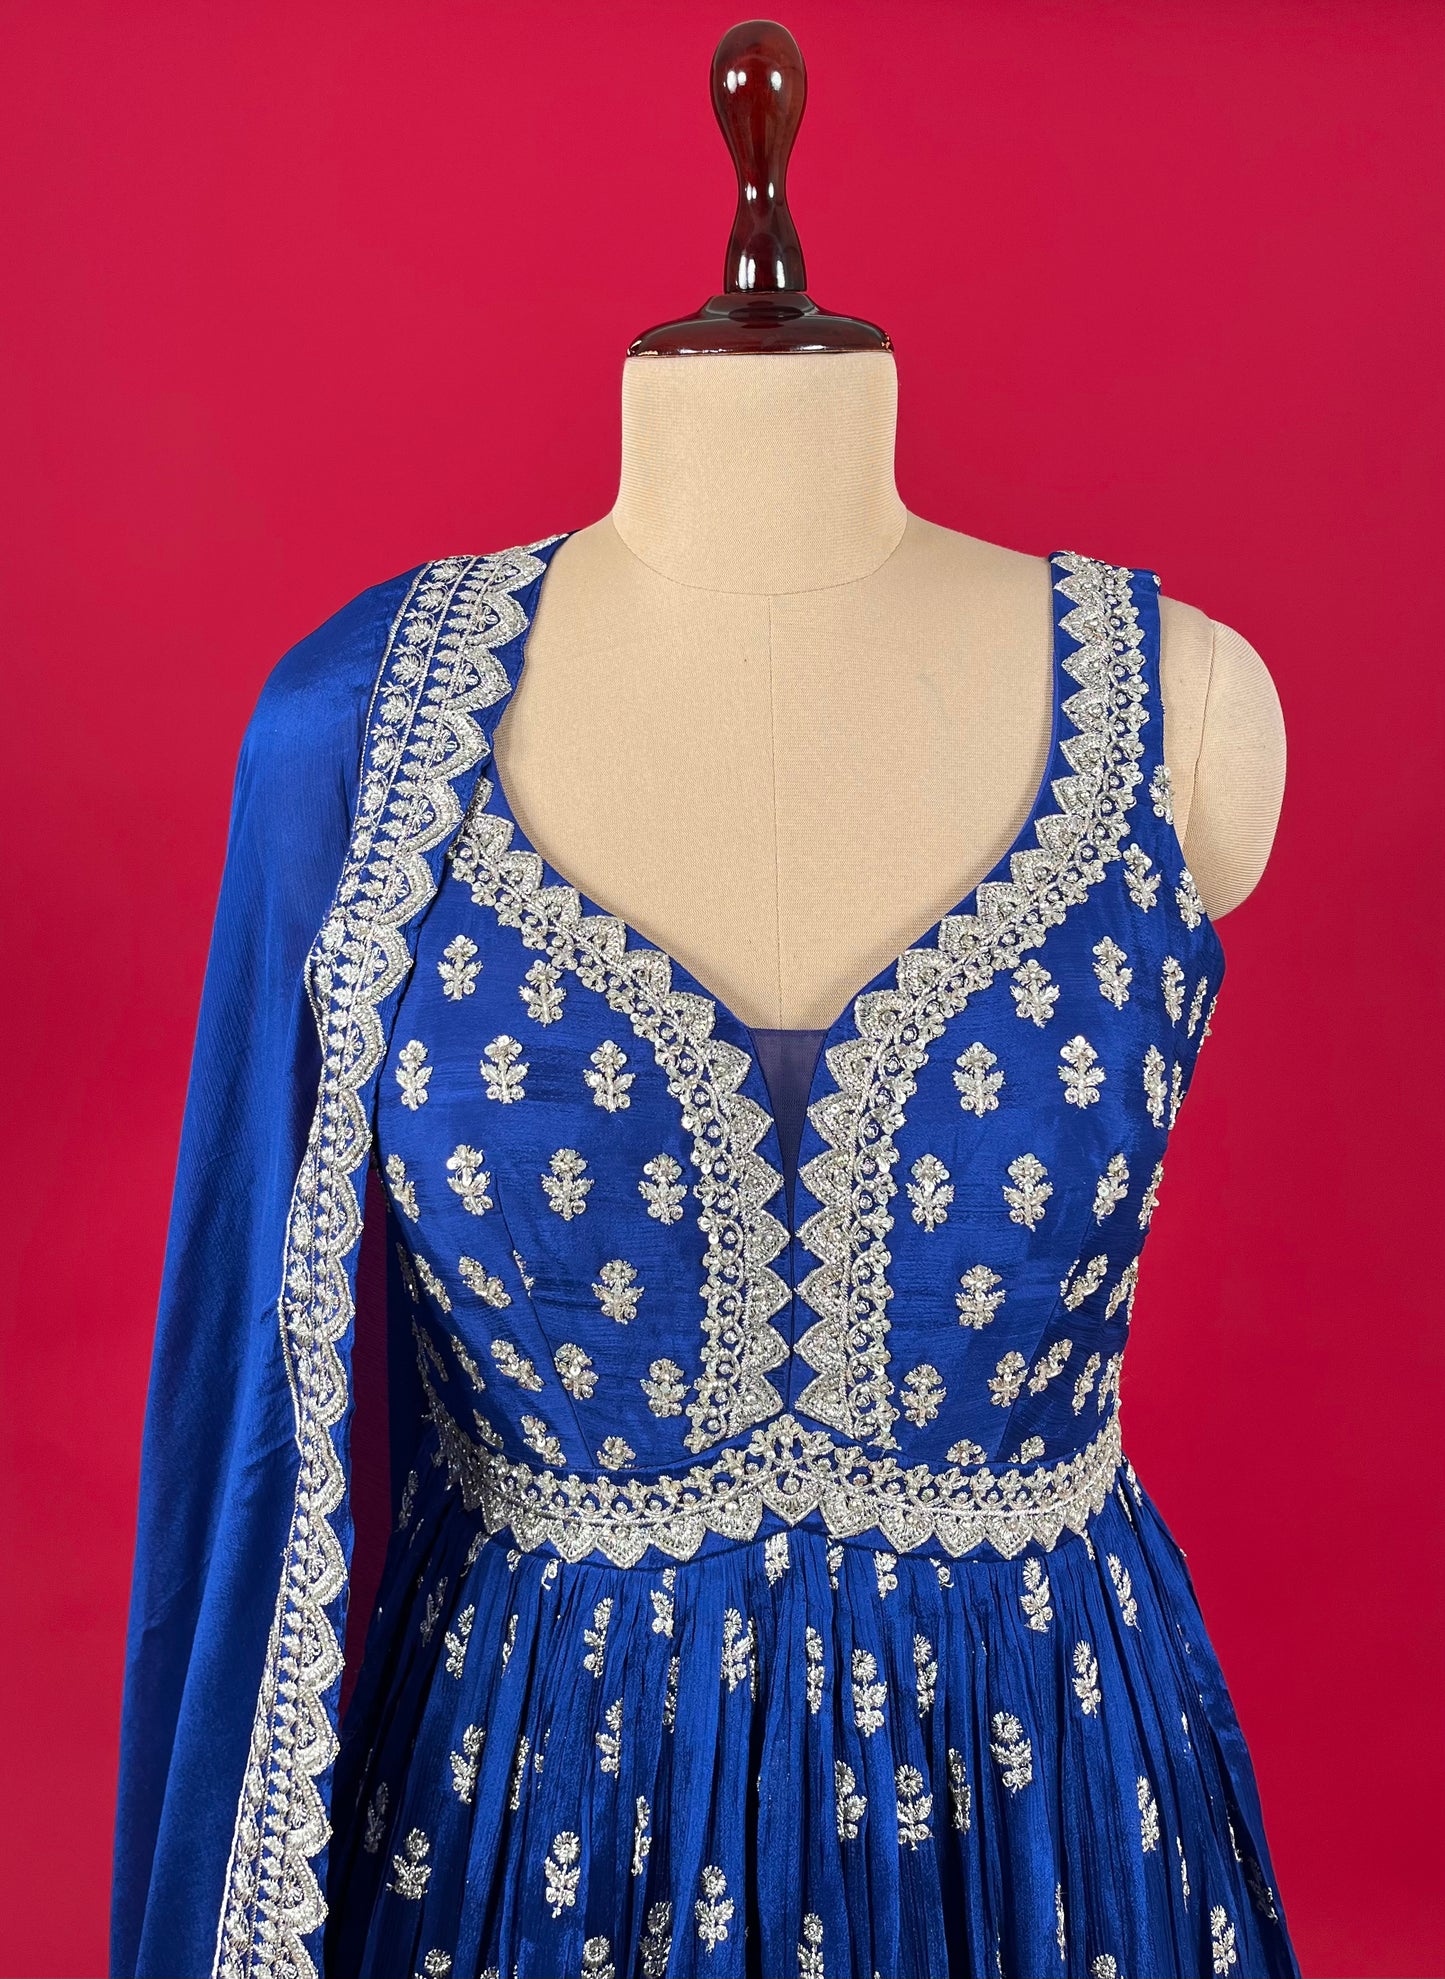 BLUE COLOUR CHINON FLOOR LENGTH ANARKALI SUIT EMBELLISHED WITH CUTDANA & ZARI WORK